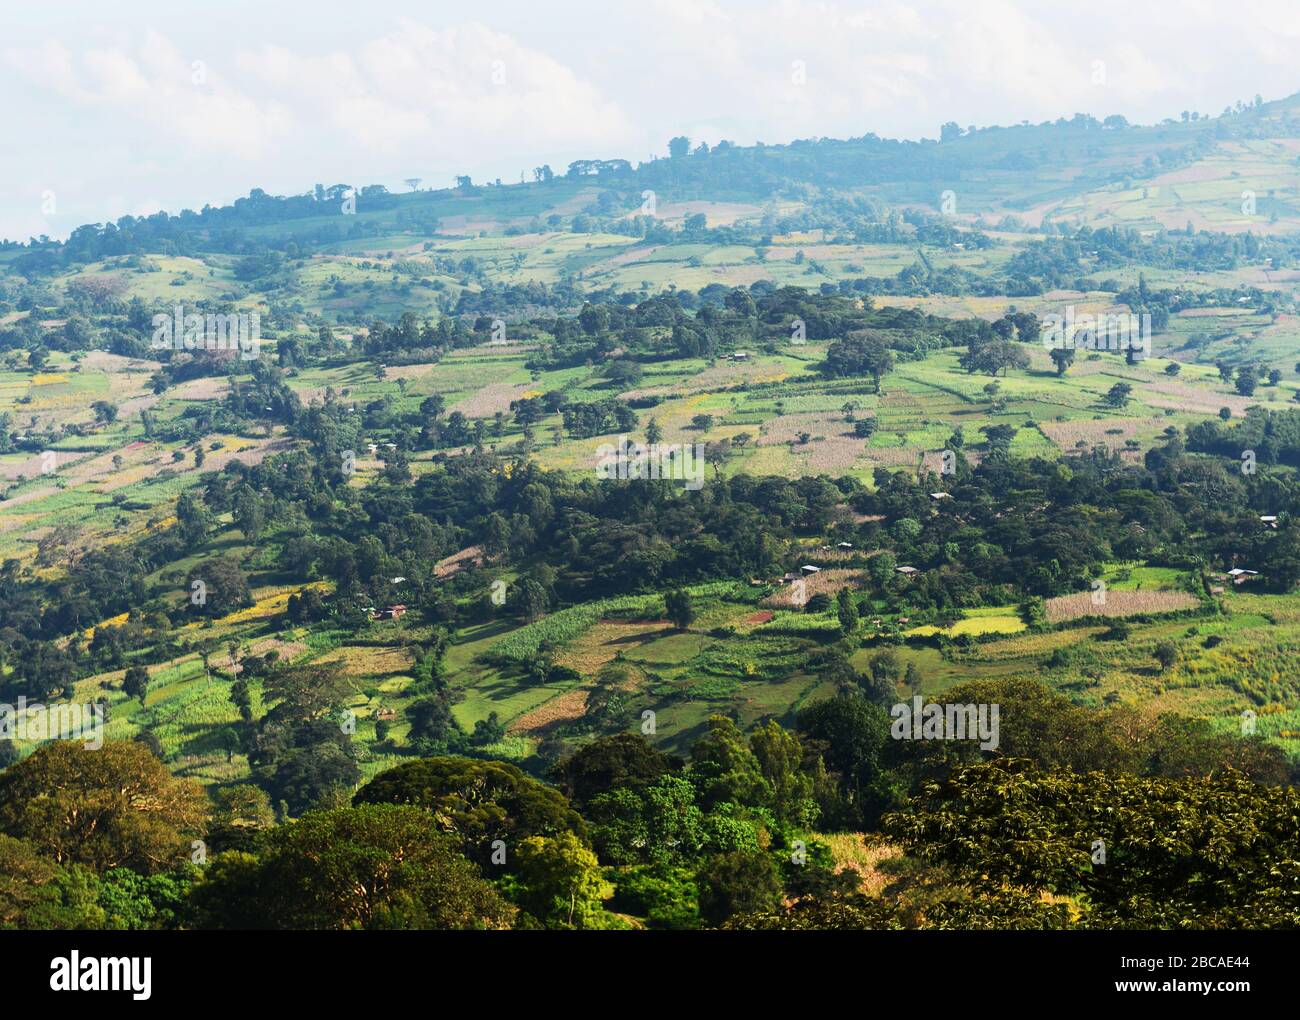 Agricultural landscapes in the Kafa region of Ethiopia. Stock Photo